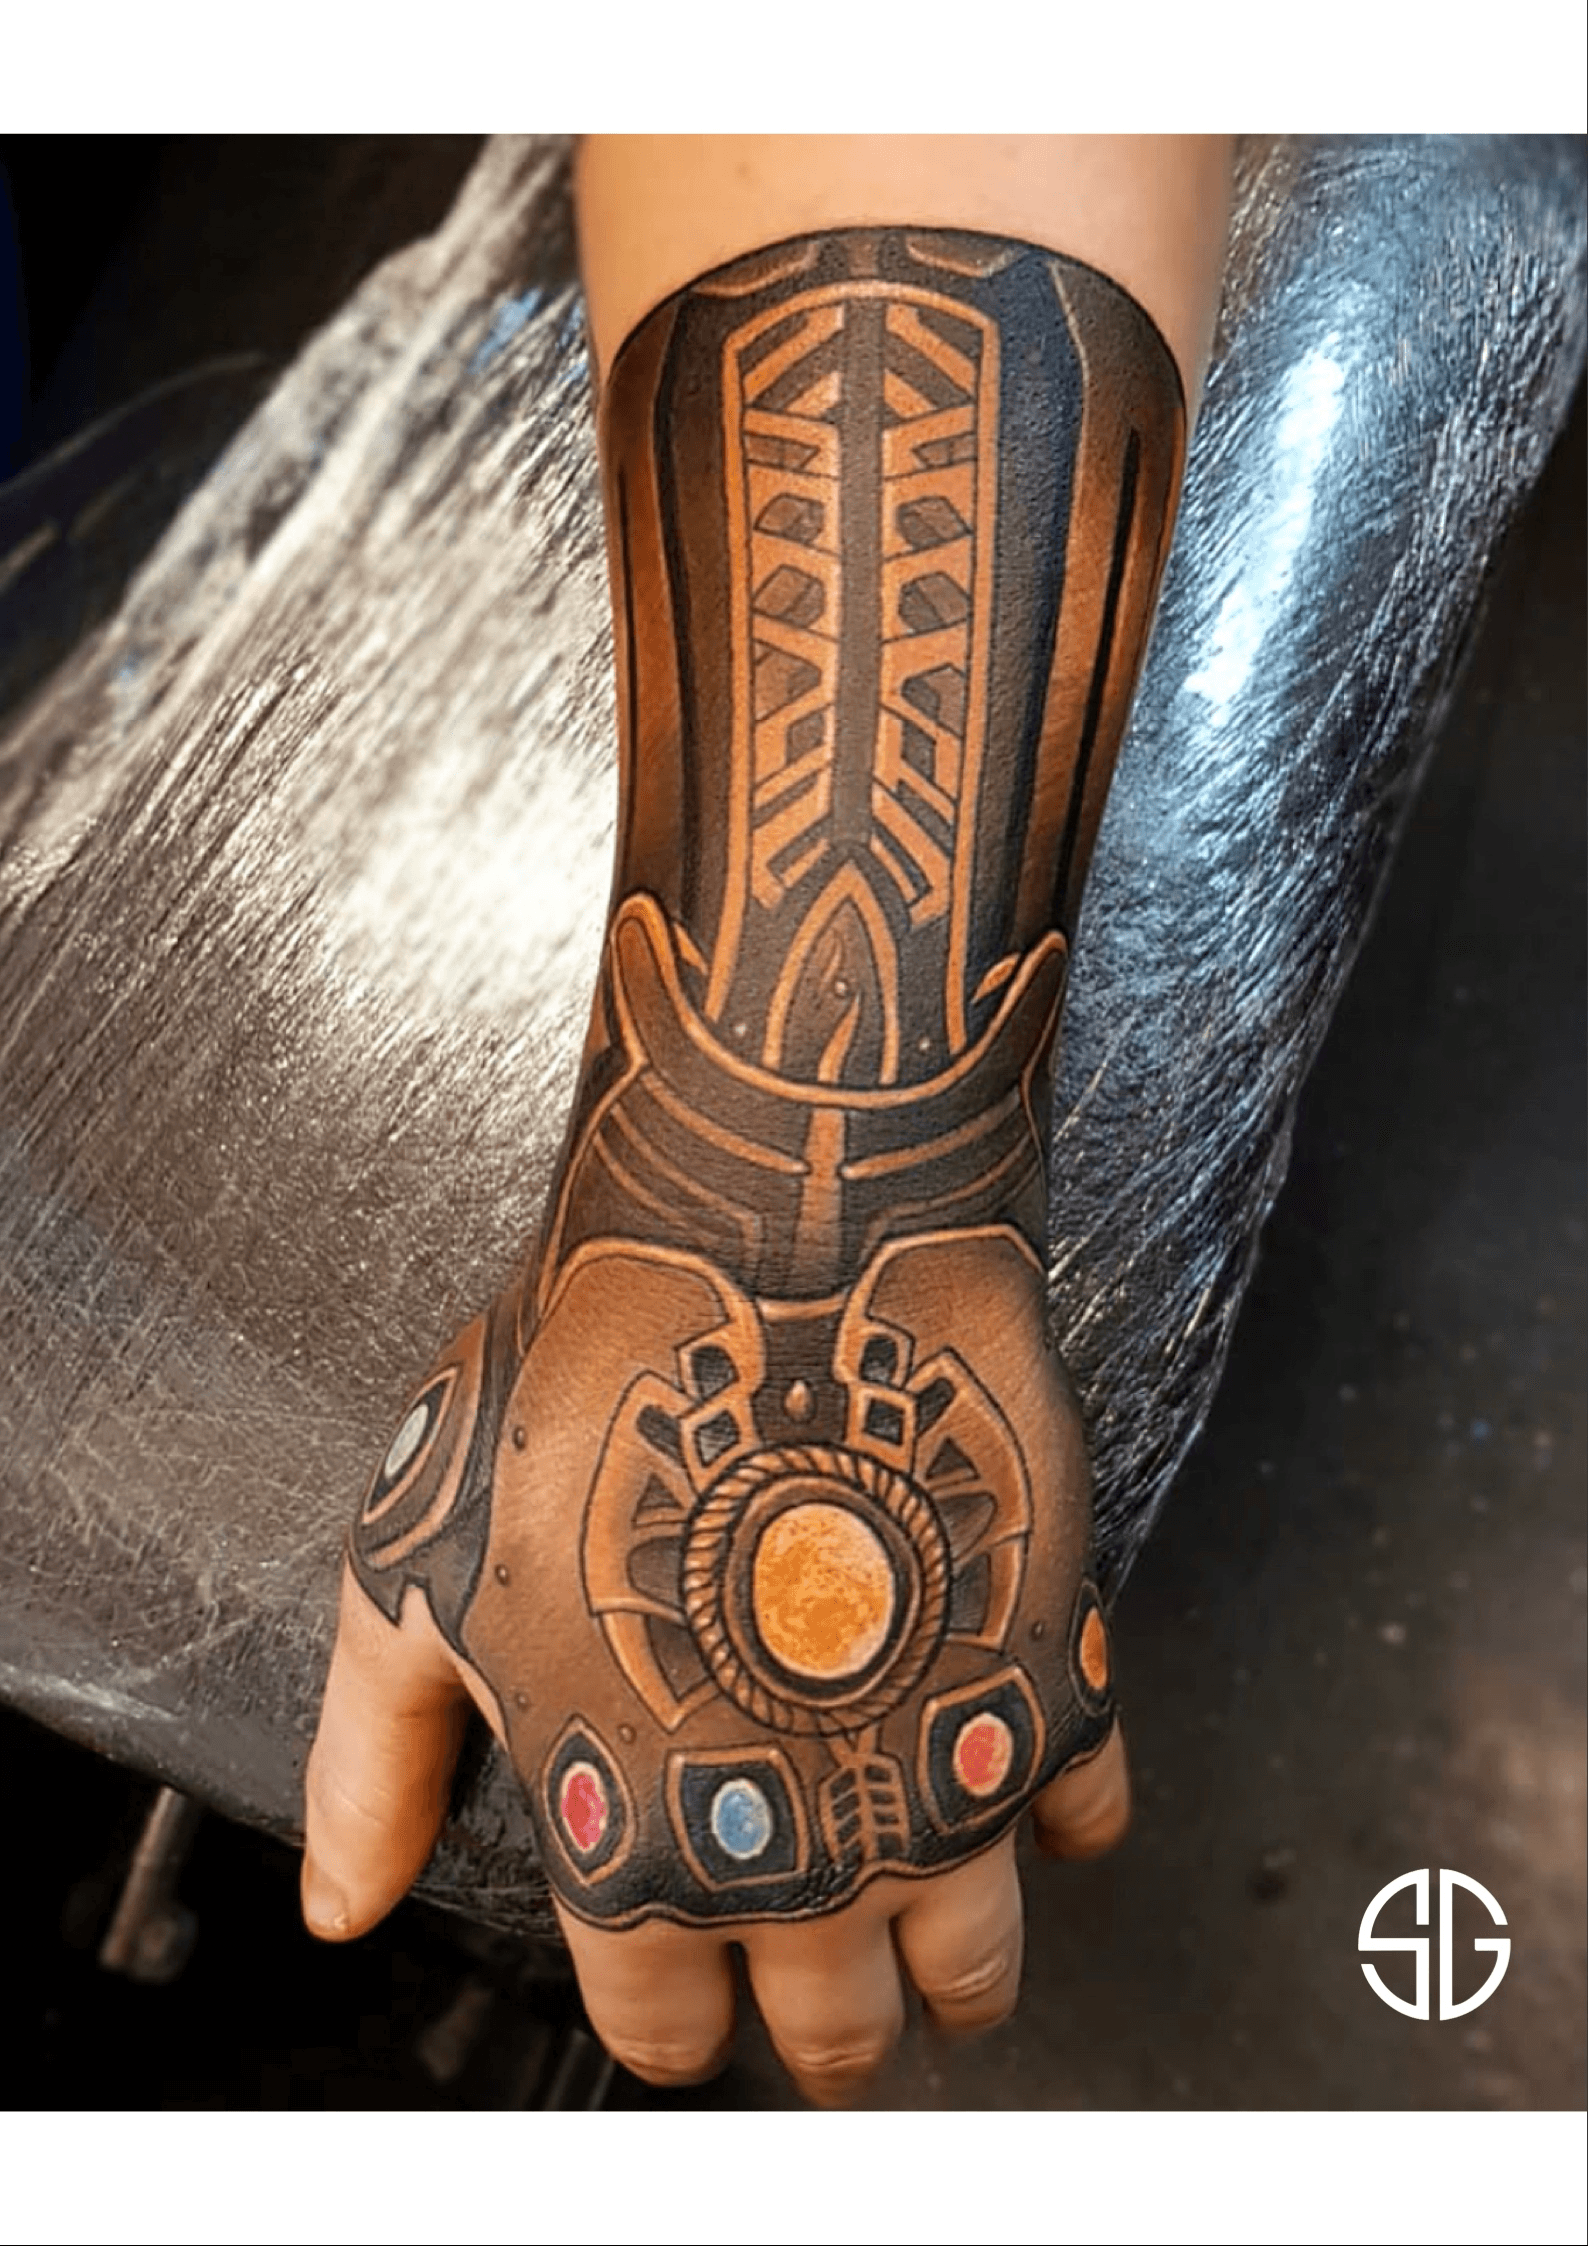 My newest tattoo The infinity gauntlet done by Maple at Deadhouse  Manchester  rtattoos